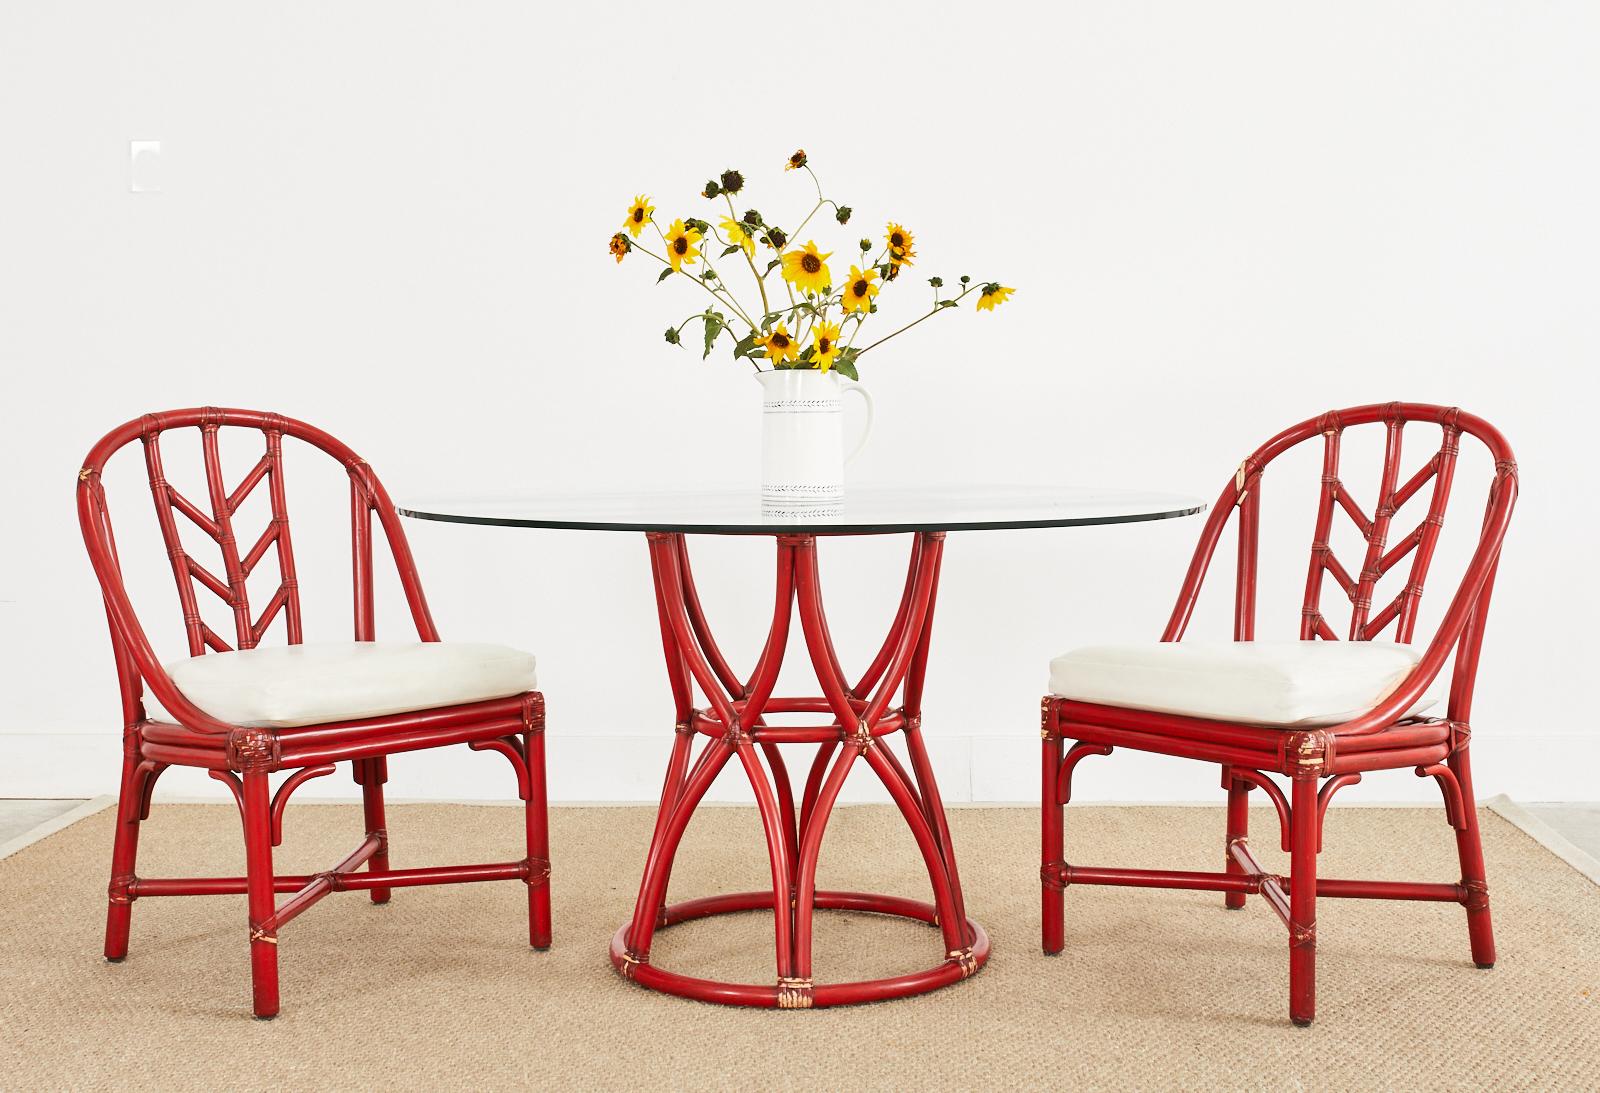 Fabulous bespoke set of four lacquered McGuire rattan dining chairs finished in a chic, whimsical, lipstick red color. Special order custom color from McGuire with an intentionally aged patina on the rawhide leather laces. The chairs have a